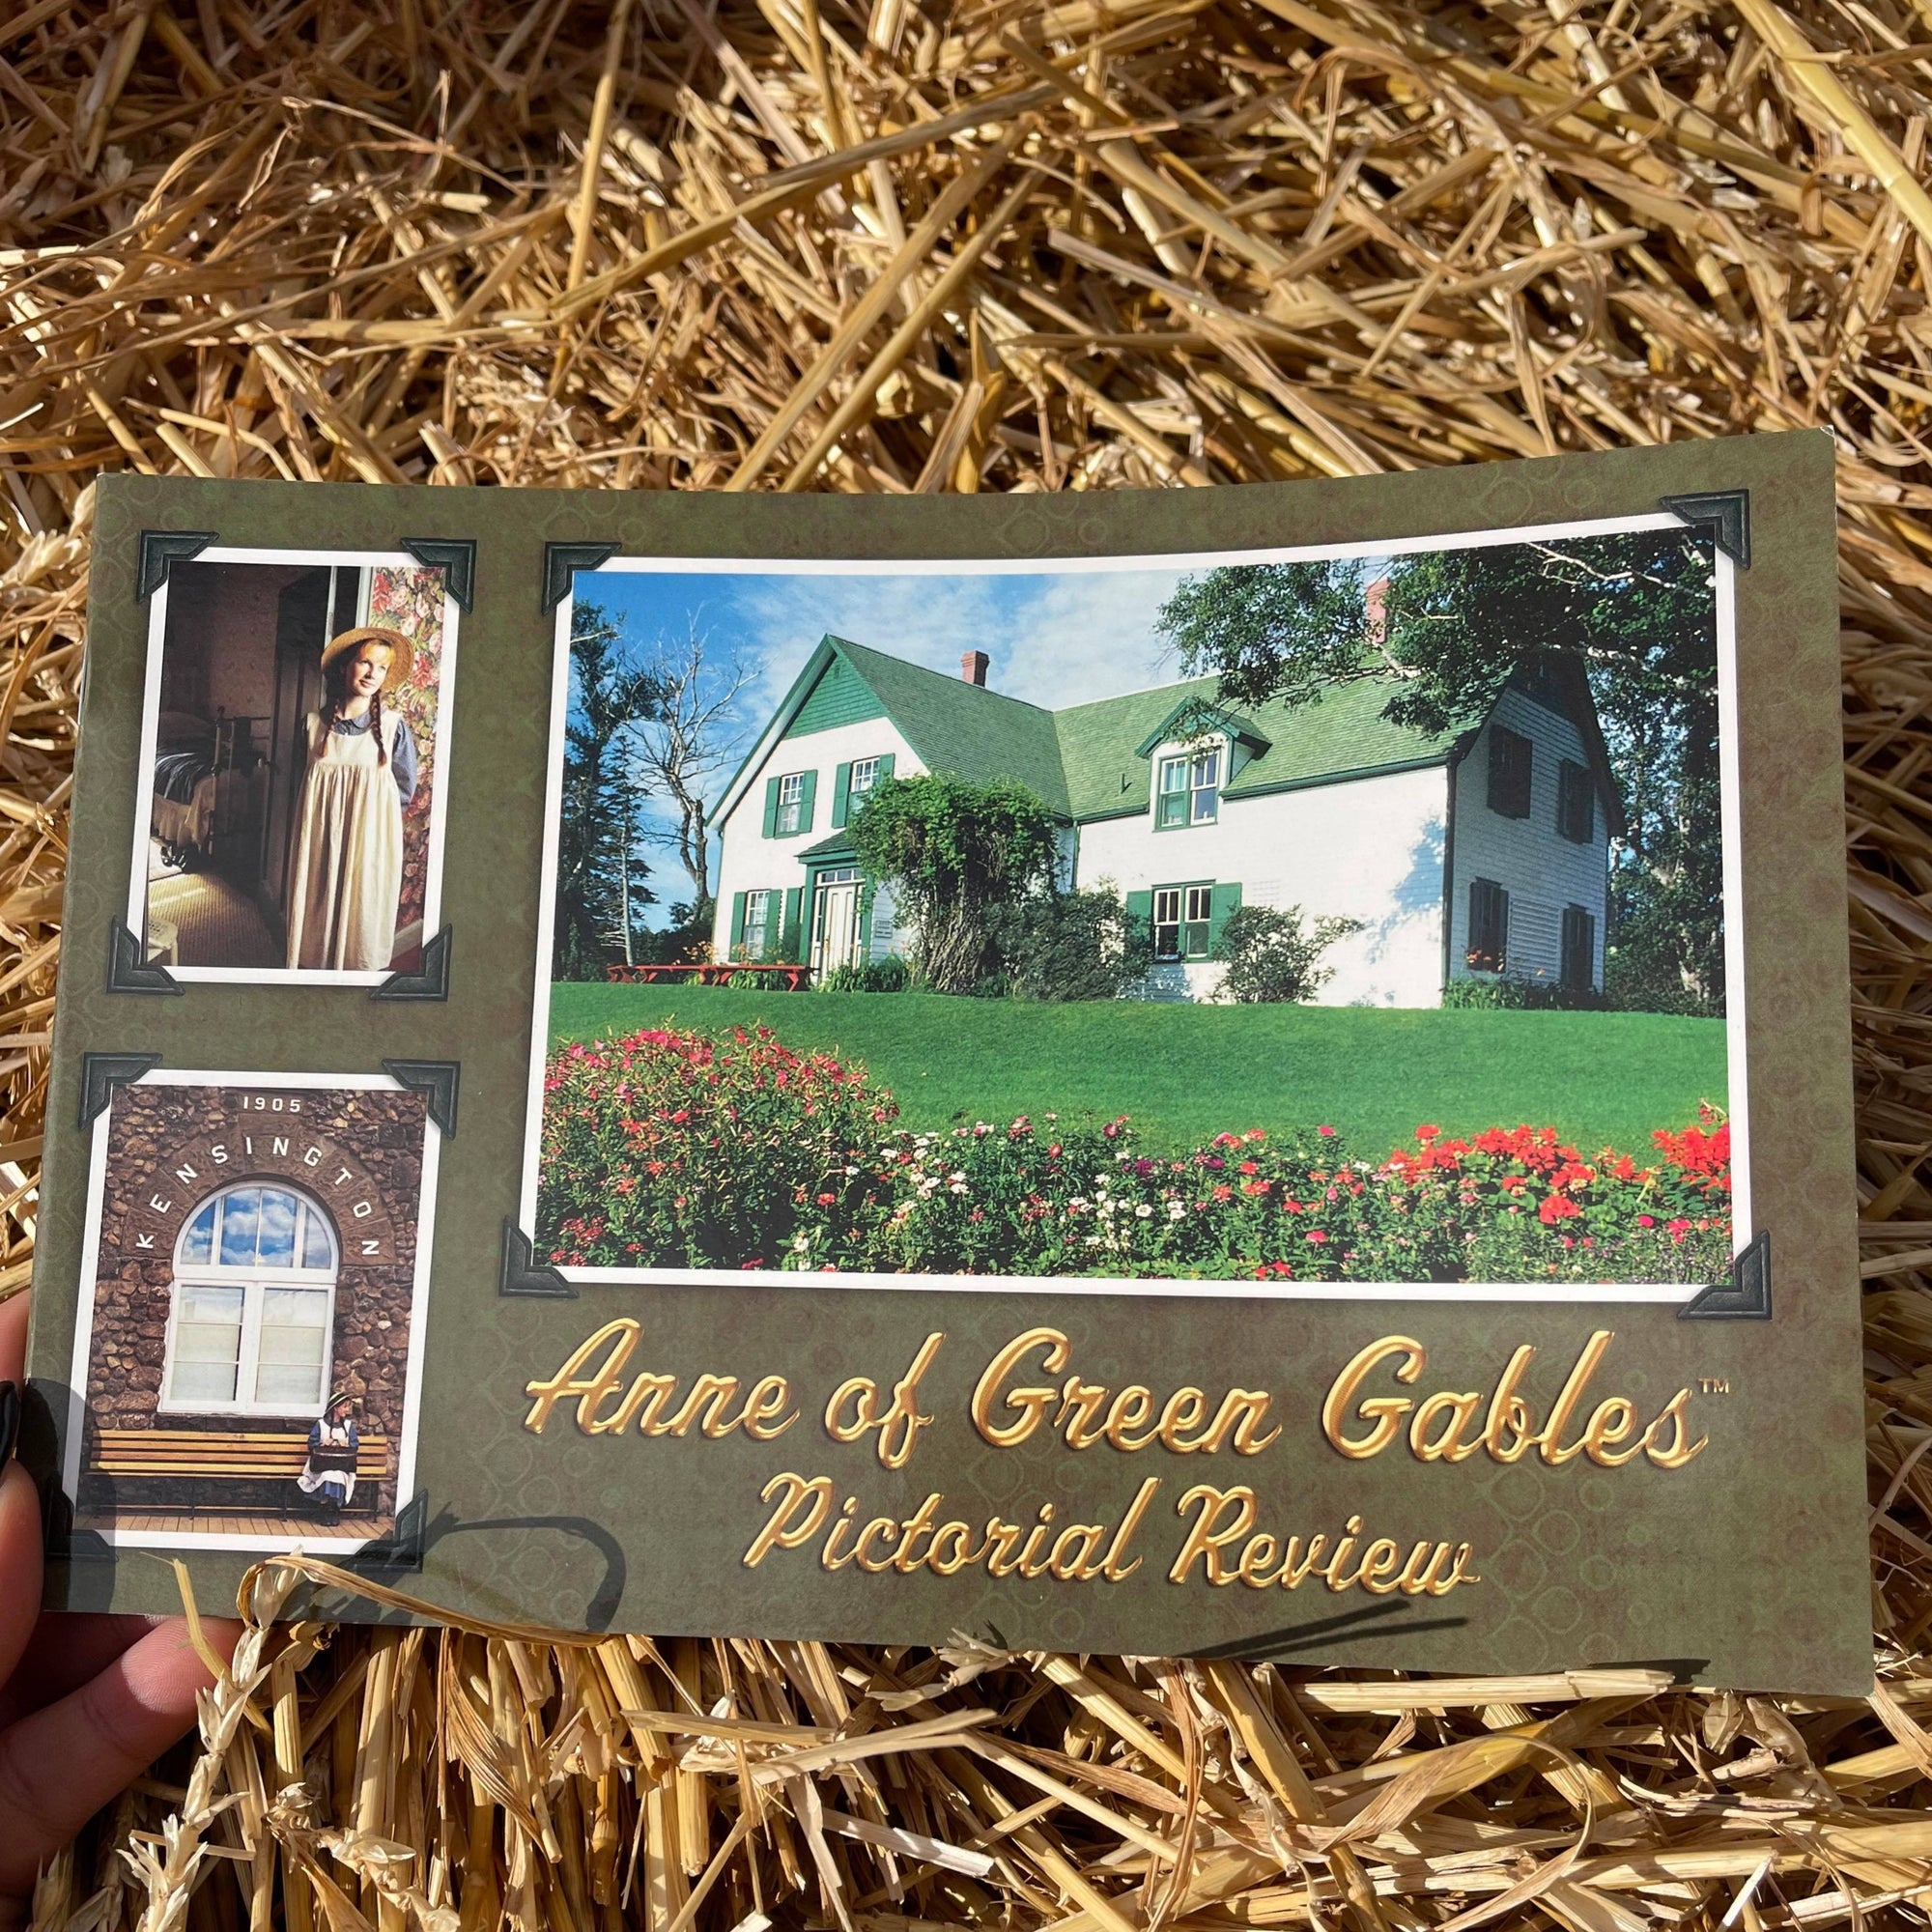 Green Gables Pictorial